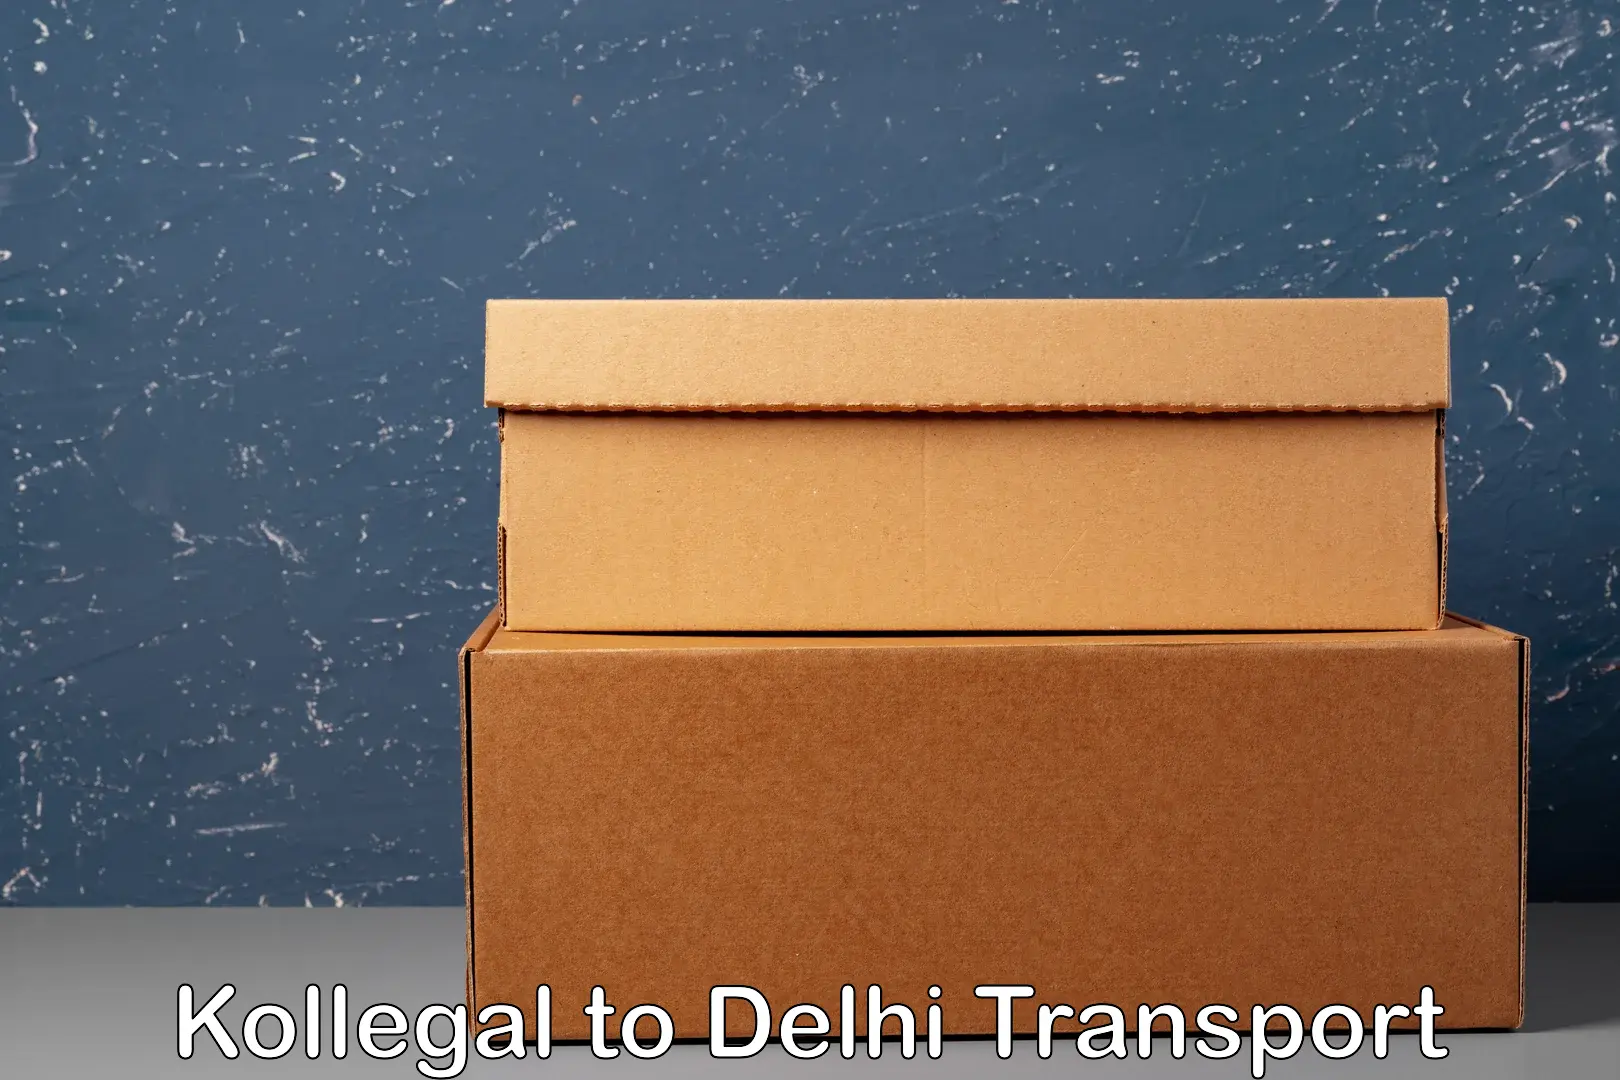 Sending bike to another city Kollegal to Delhi